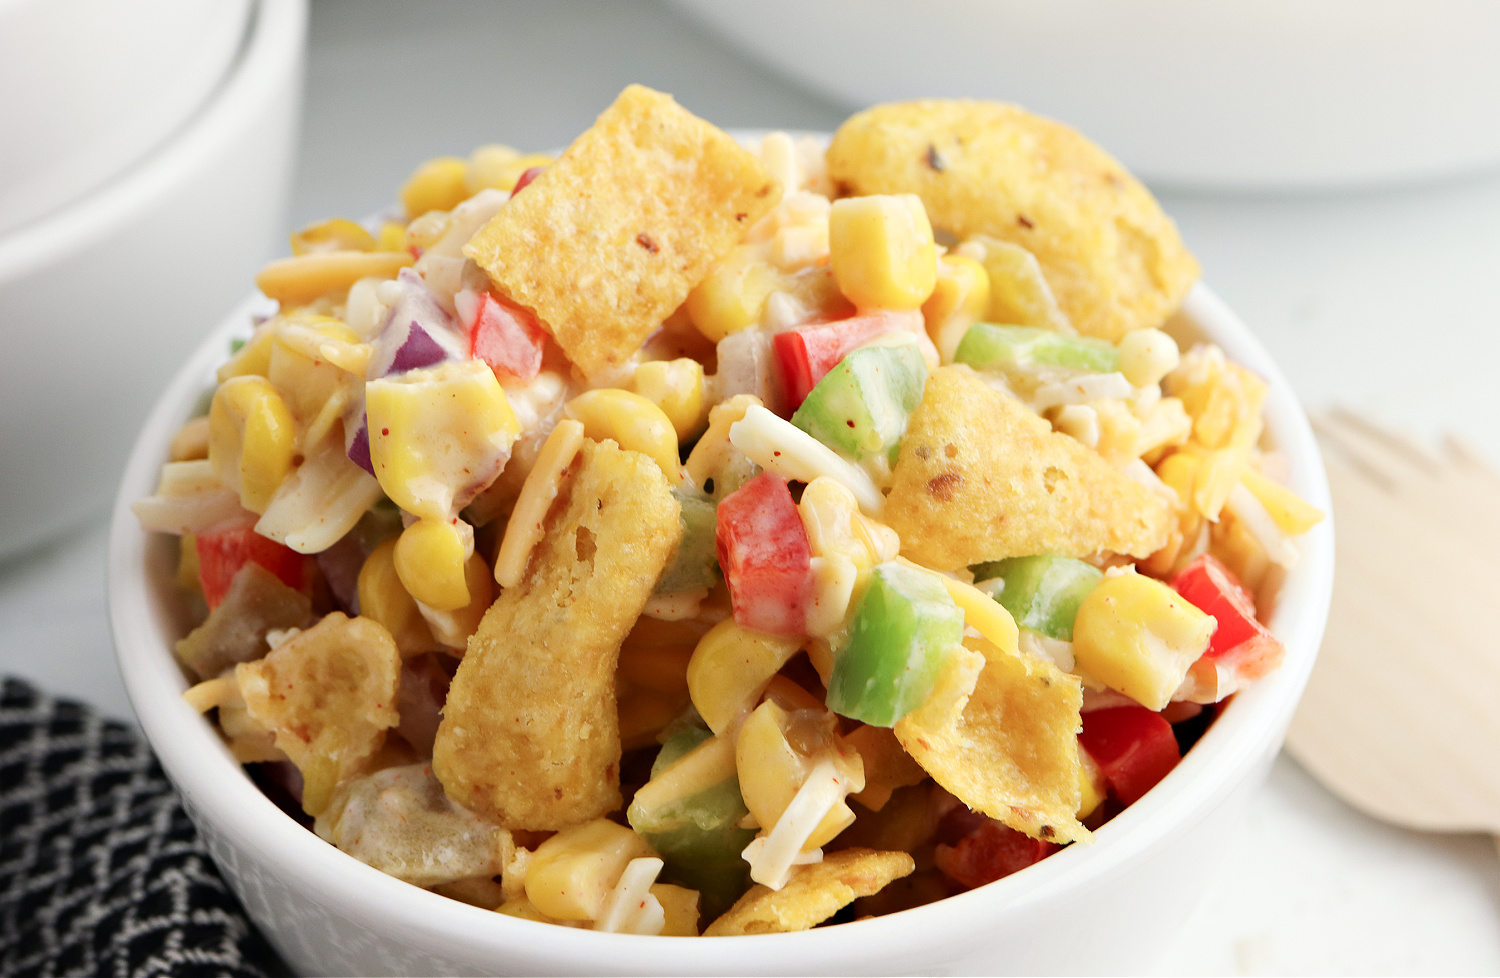 frito corn salad being served in a white bowl